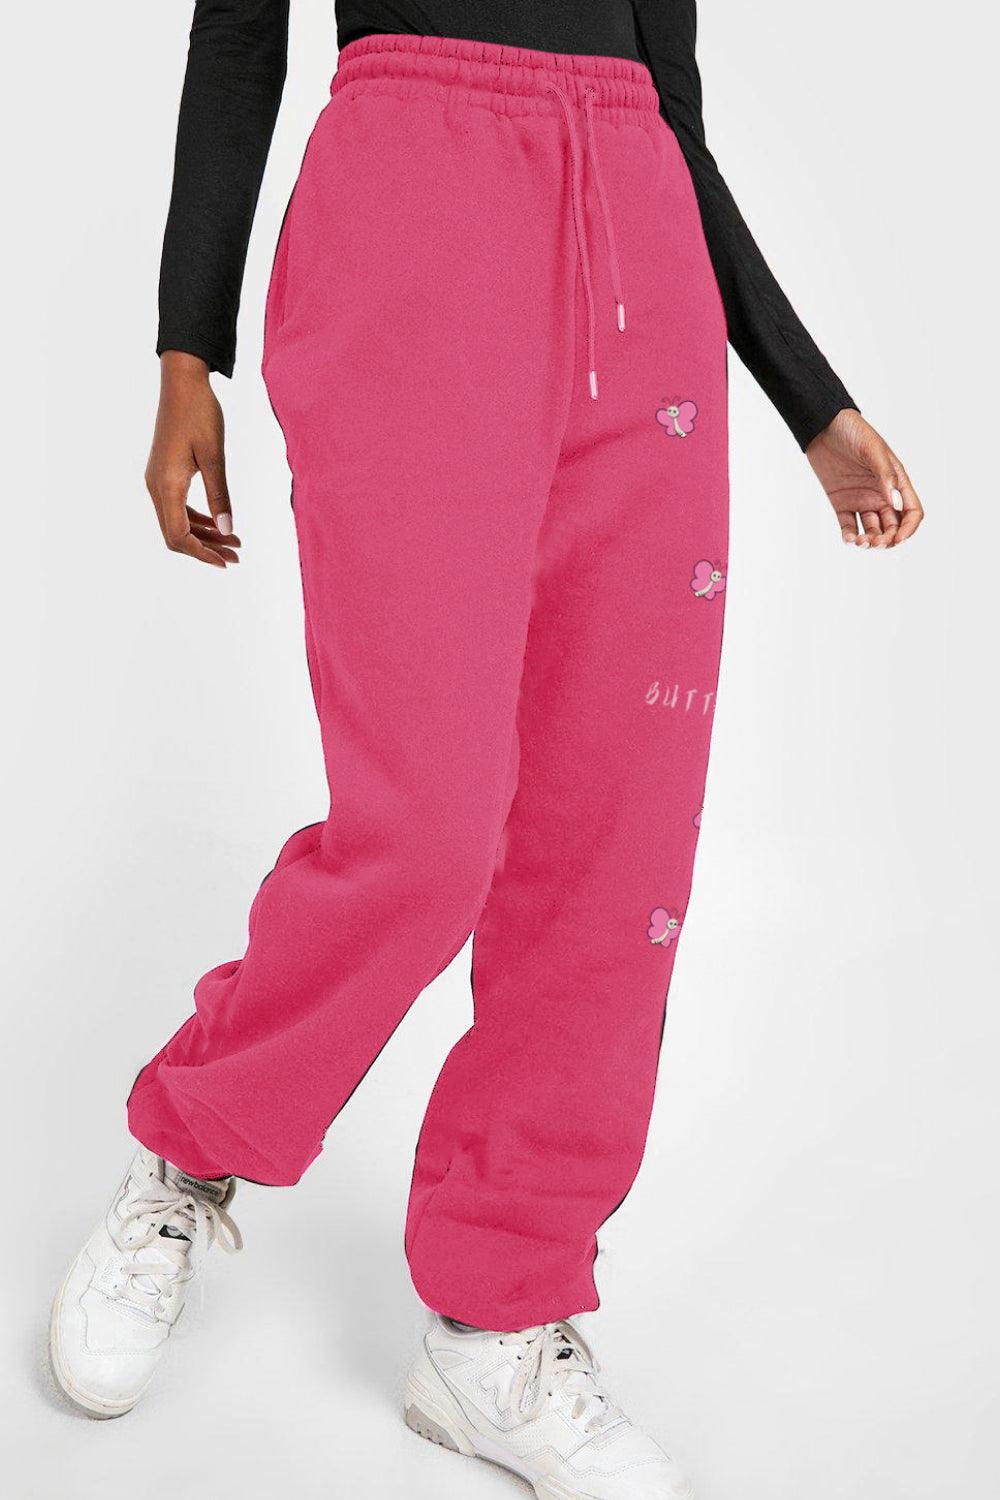 Simply Love Simply Love Full Size Drawstring BUTTERFLY Graphic Long Sweatpants - Lab Fashion, Home & Health